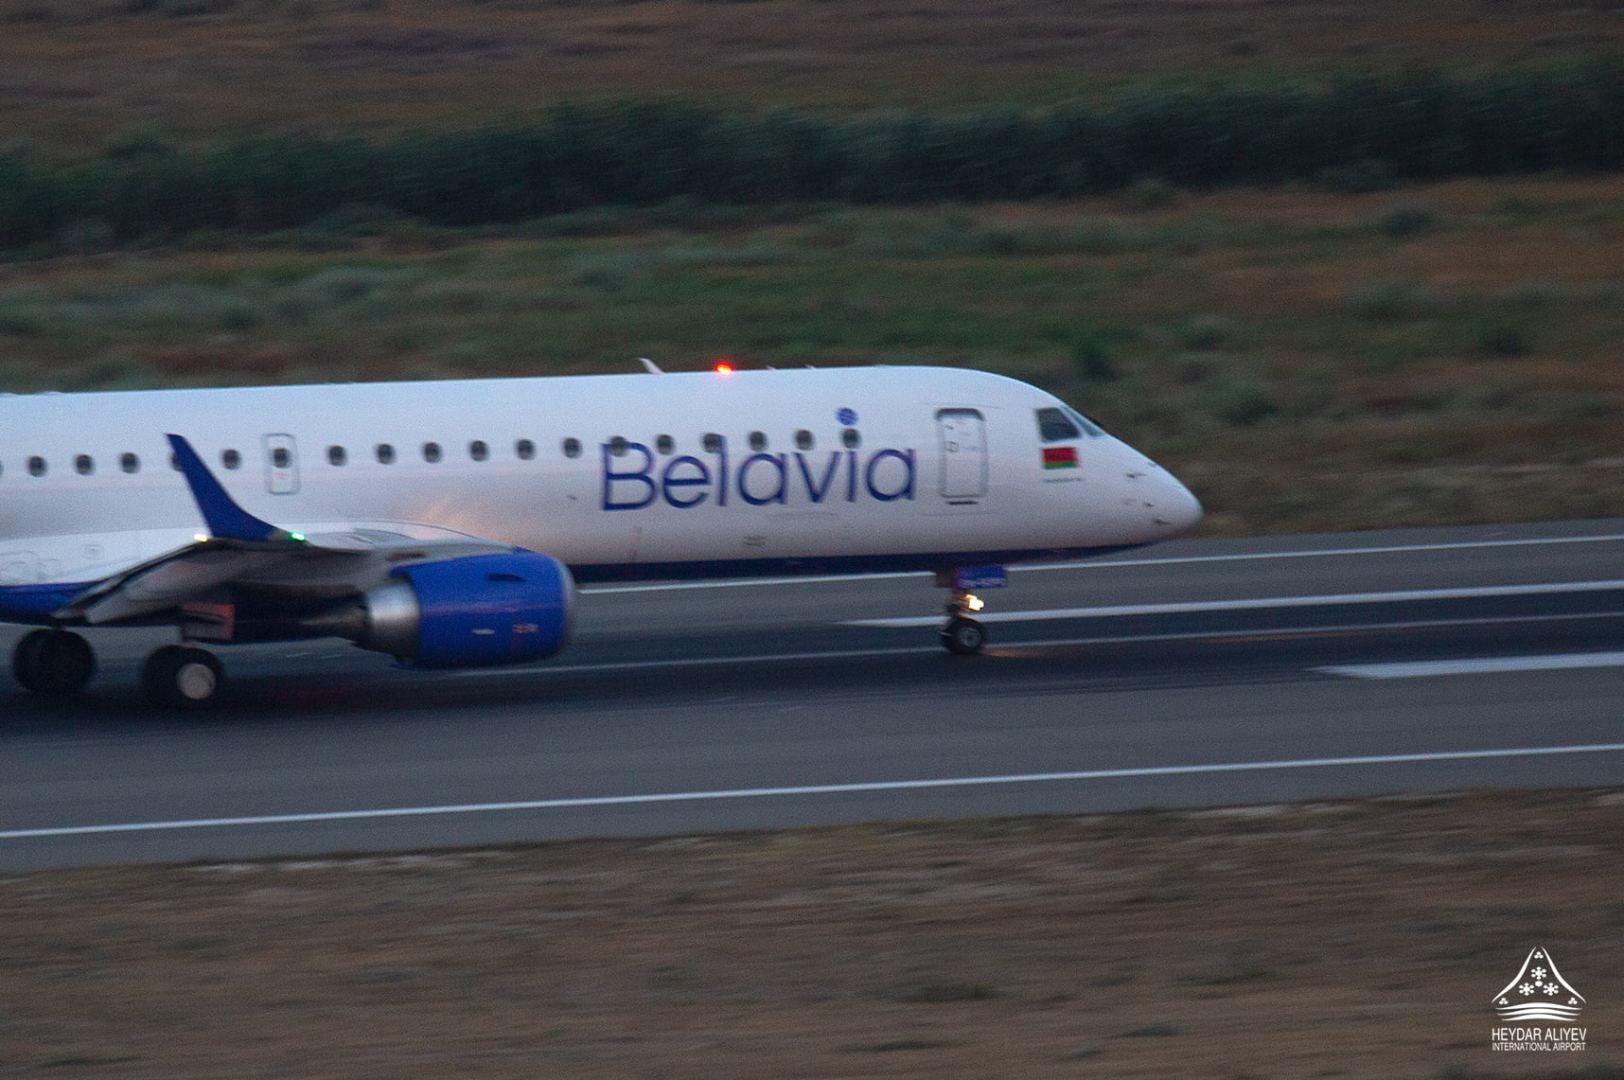 Belavia airlines from Belarus to increase flight frequency to Turkmenistan